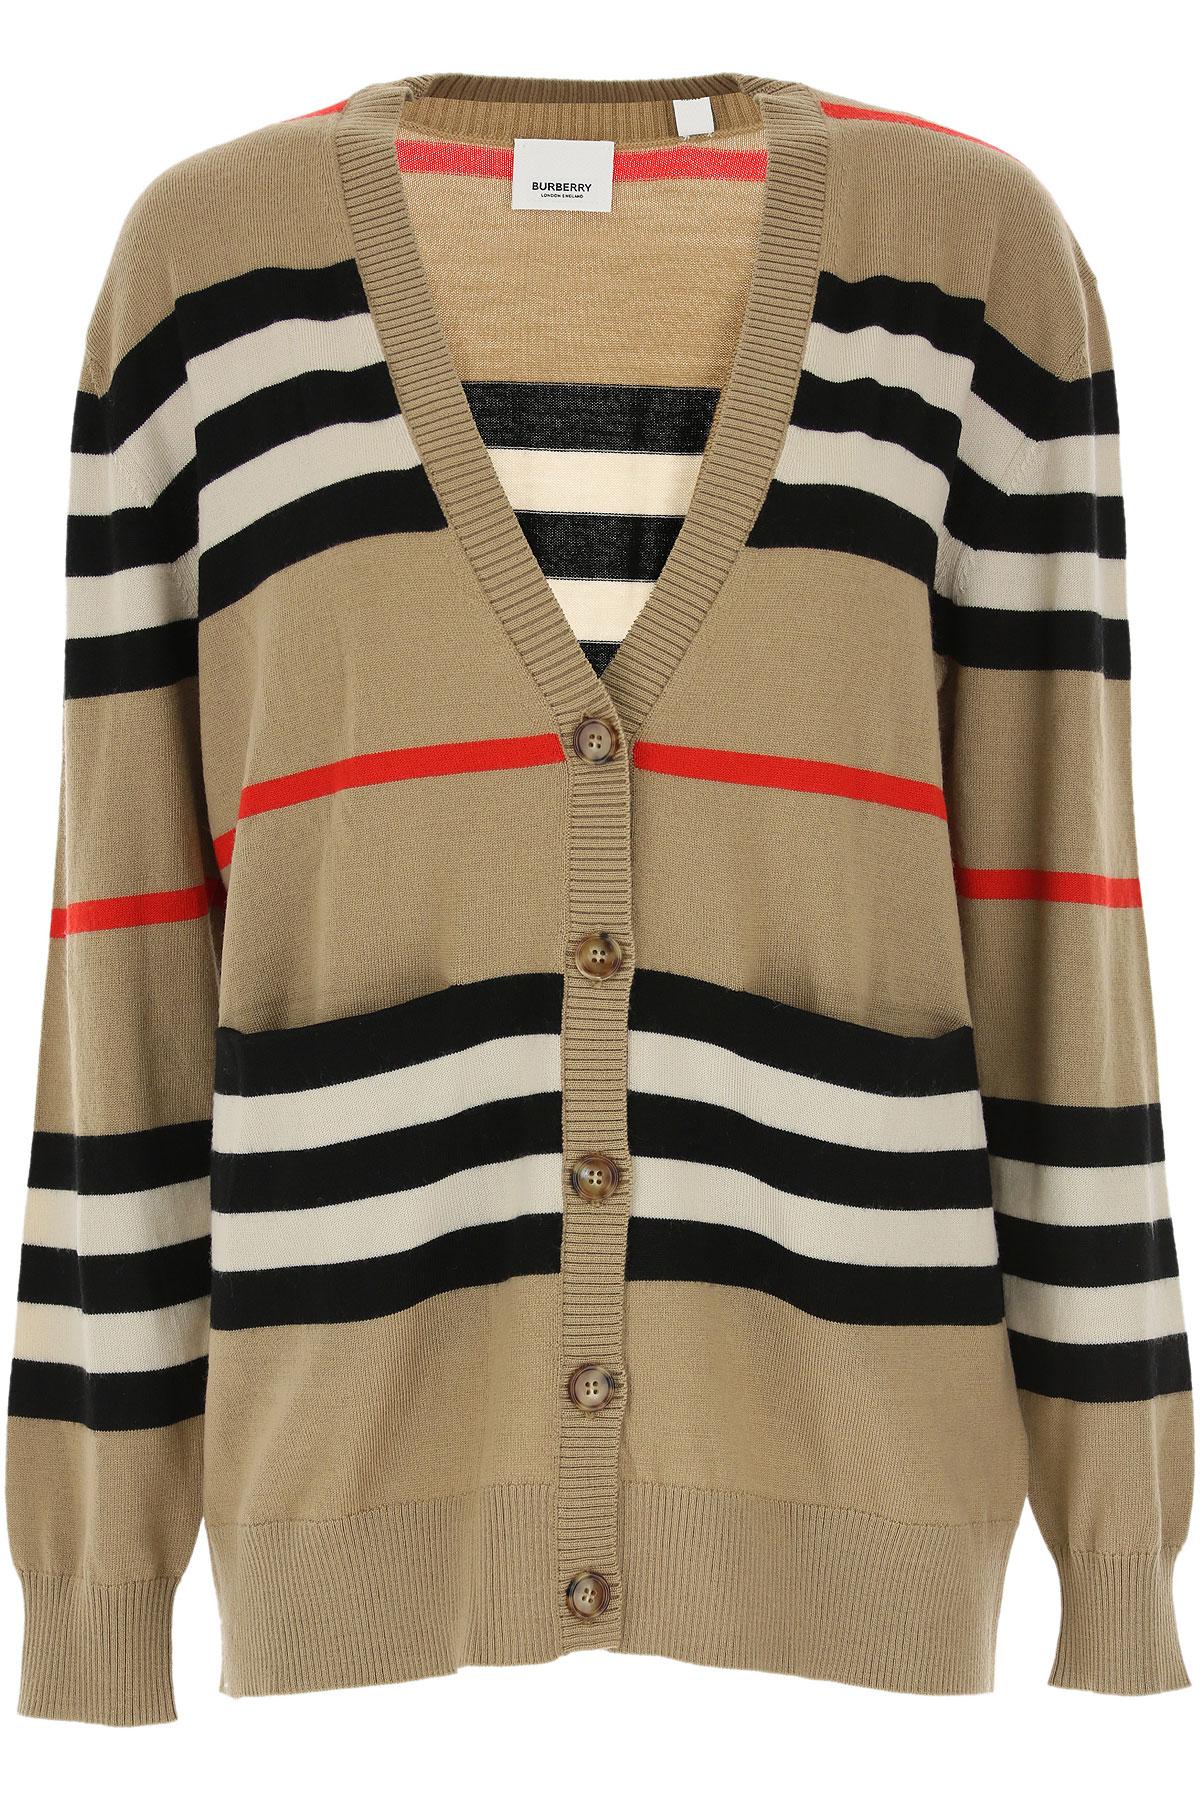 Burberry Wool Sweater For Women Jumper In Beige Natural Lyst